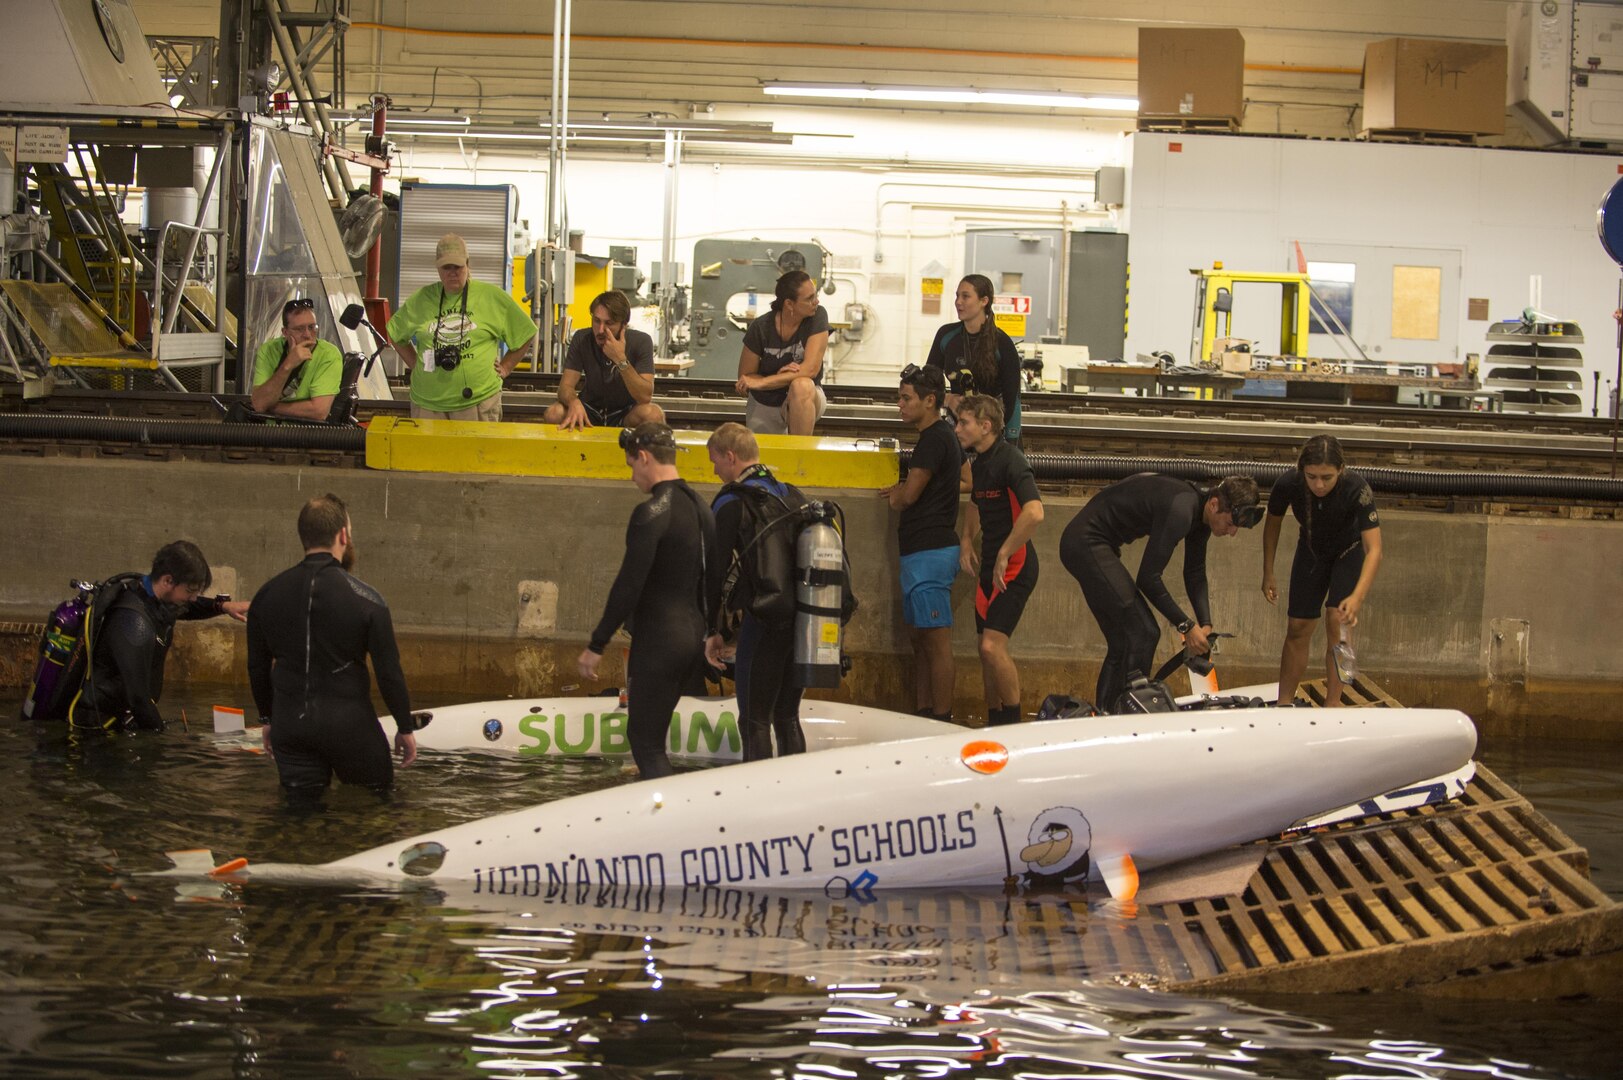 Naval Surface Warfare Center, Carderock Division, hosts the 14th International Human-Powered Submarine Races, at  West Bethesda, Md., June 26. During this biennial engineering design competition, high school and college engineering students team up to design, build and operate a human-powered submarine and navigate it through an underwater course.